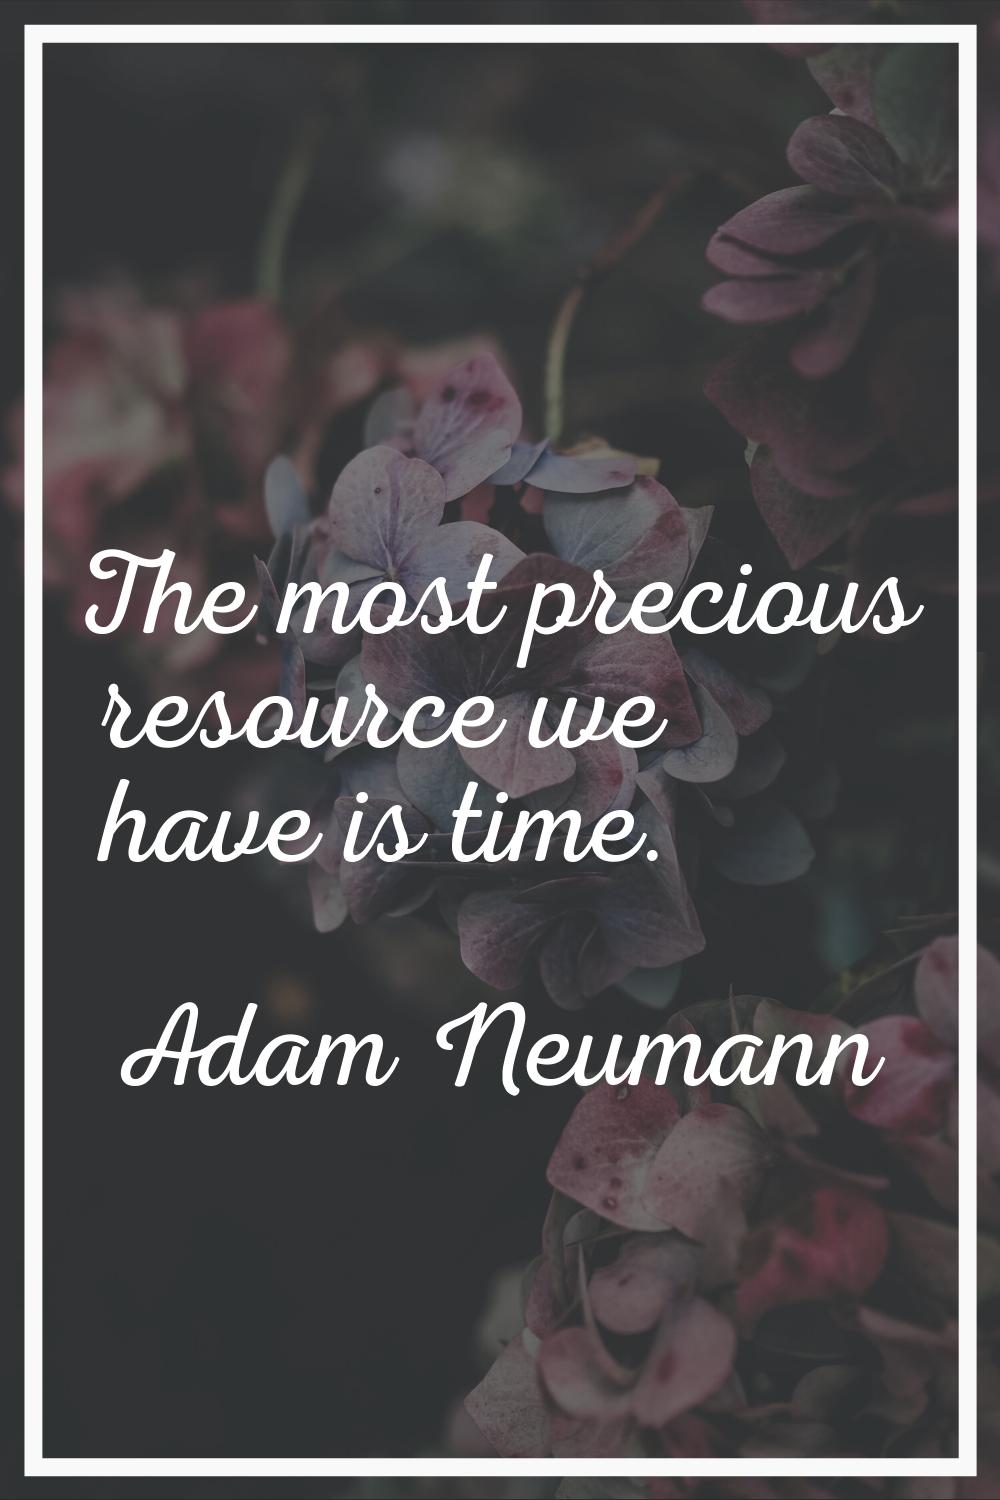 The most precious resource we have is time.